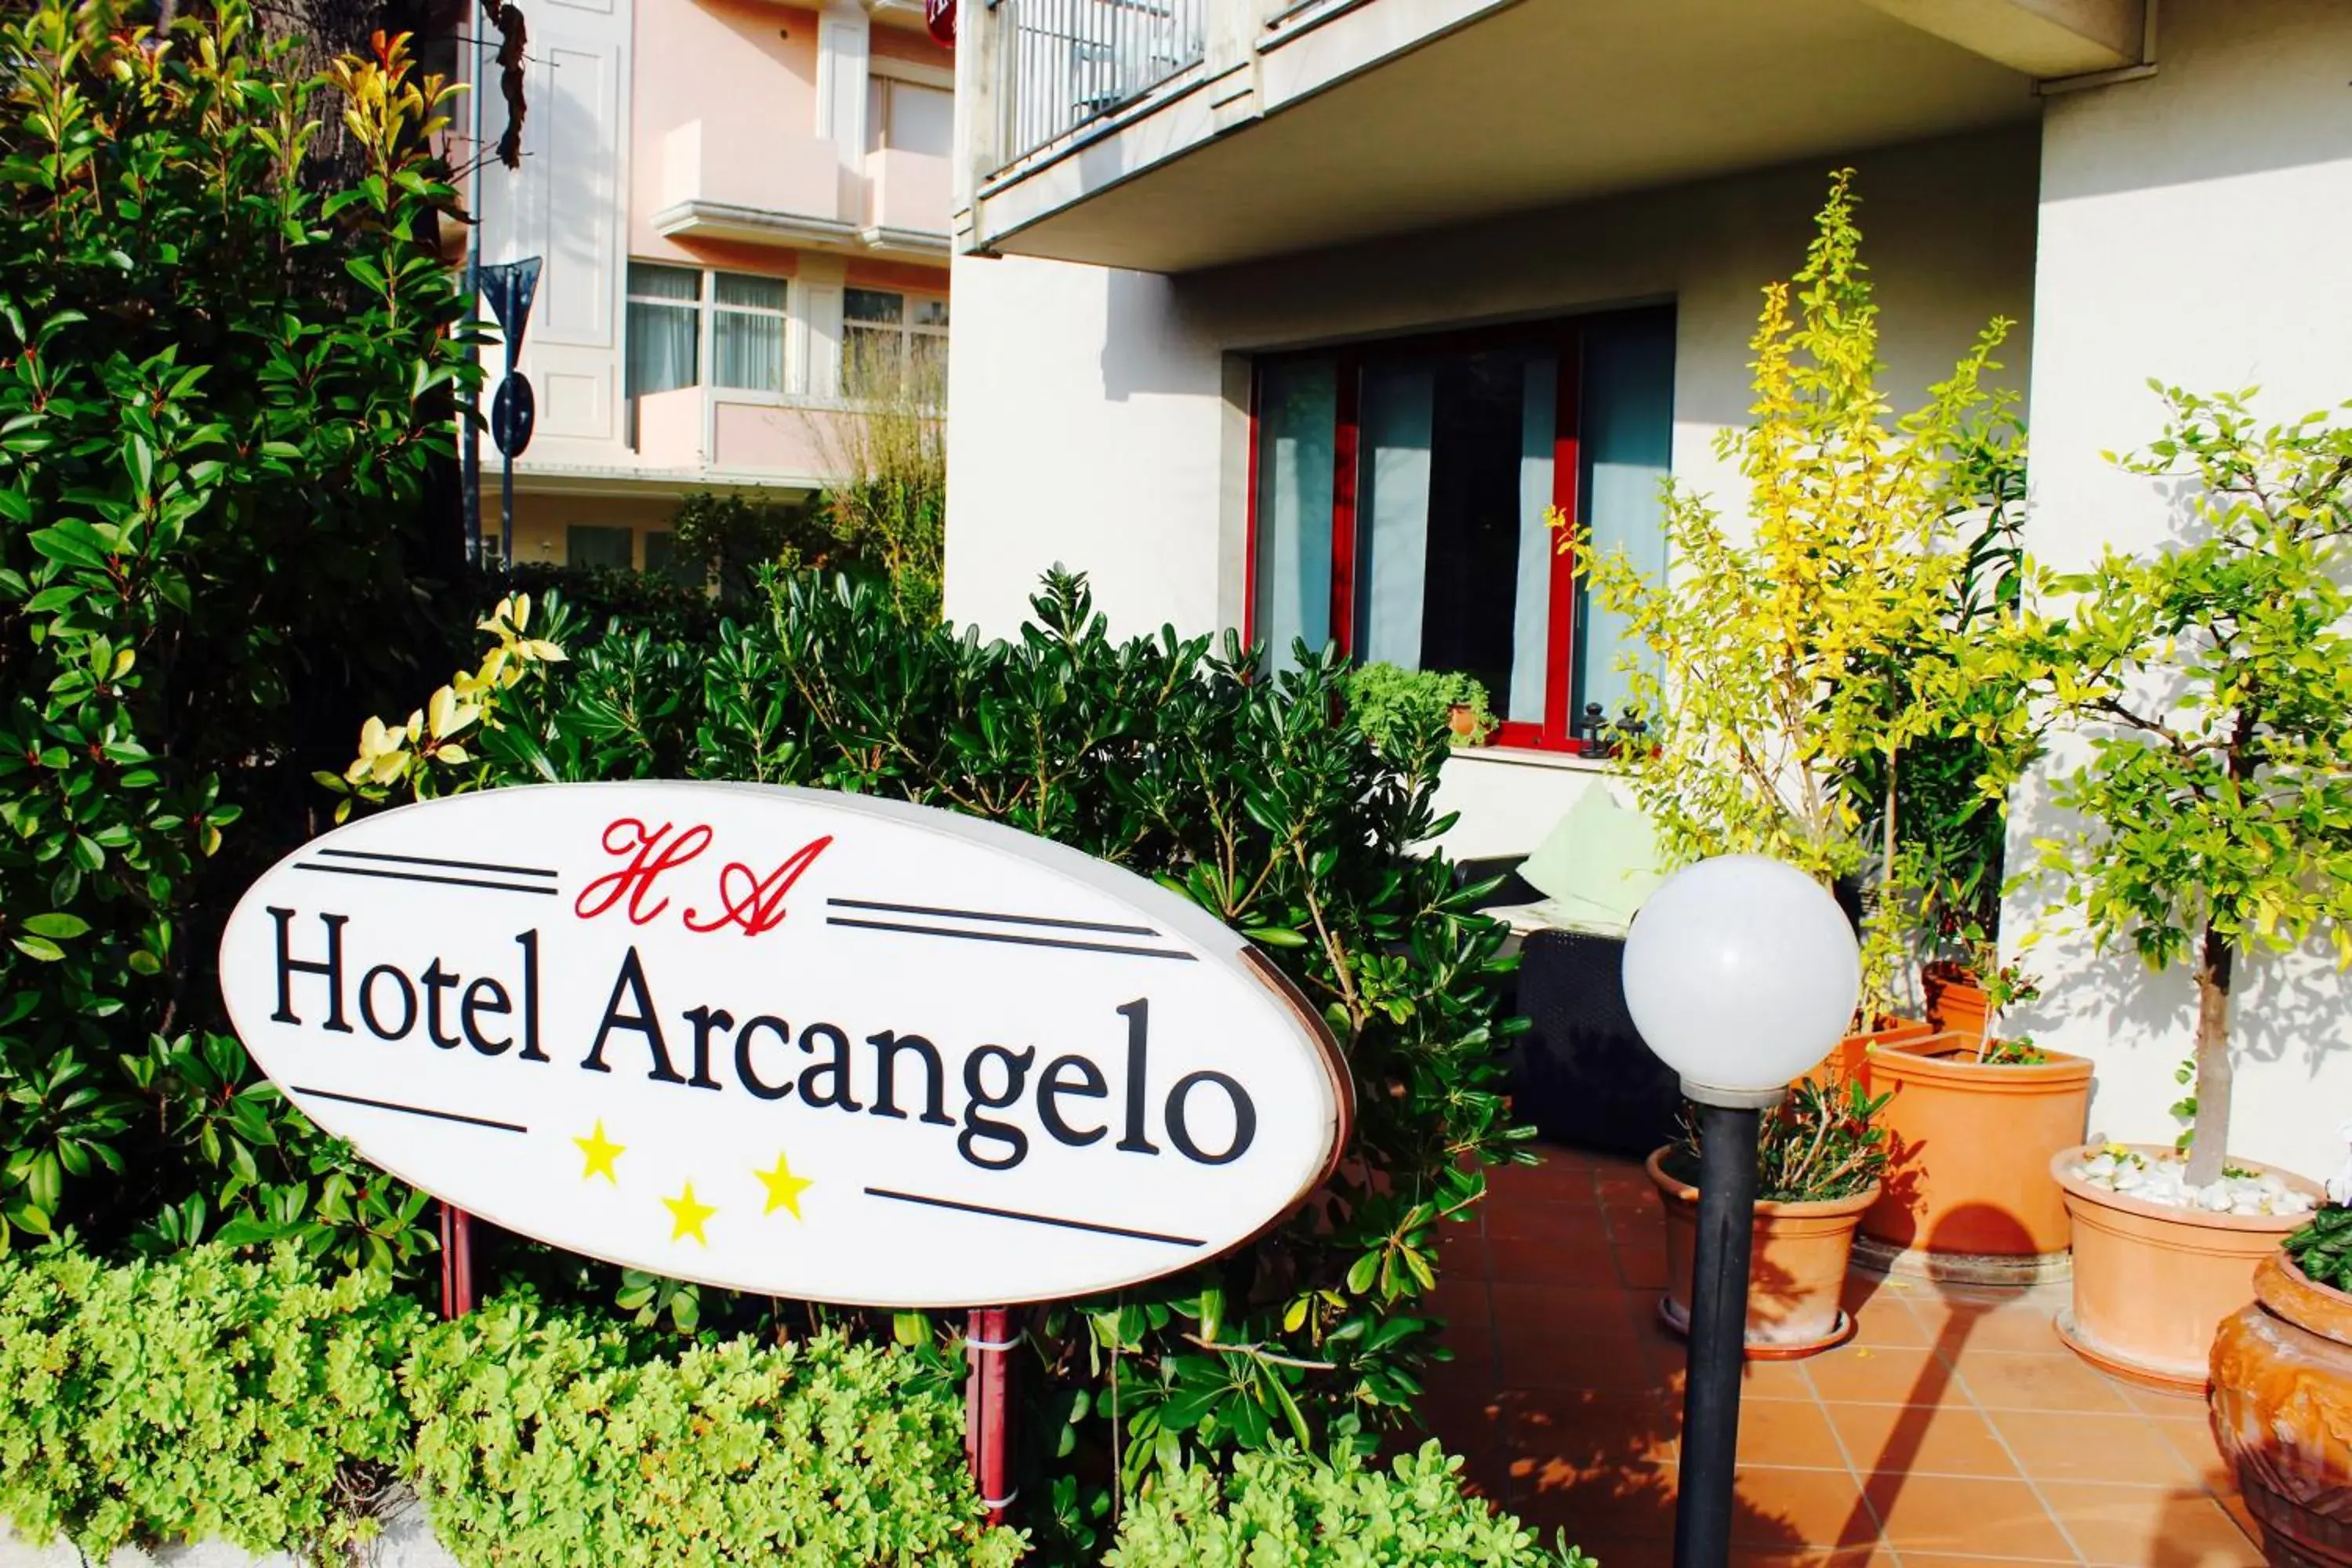 Property logo or sign in Hotel Arcangelo